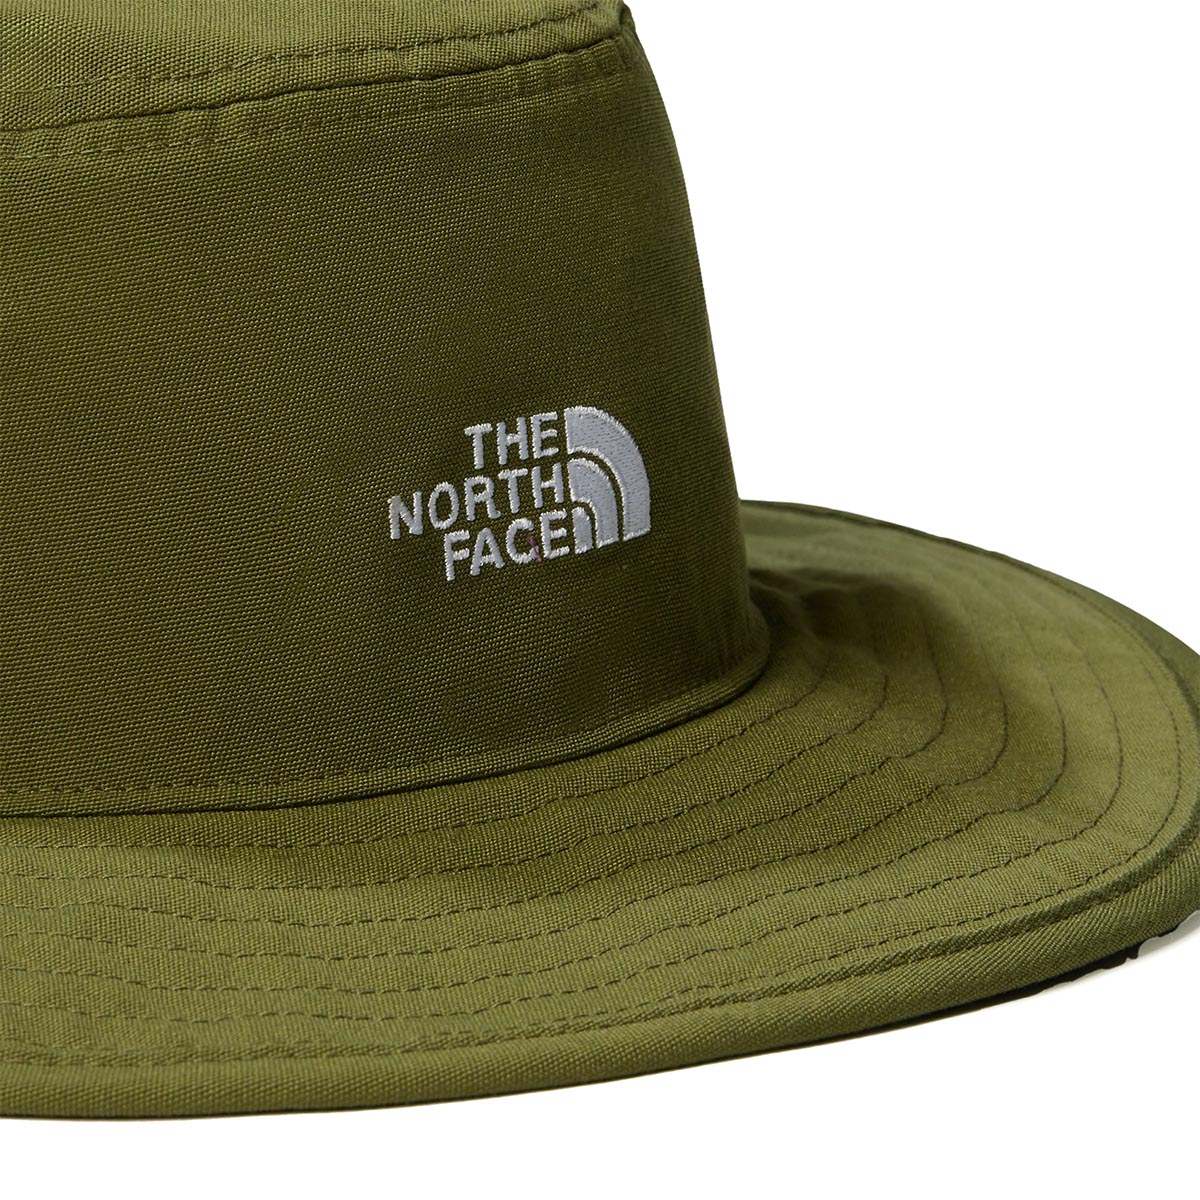 THE NORTH FACE - RECYCLED 66 BRIMMER